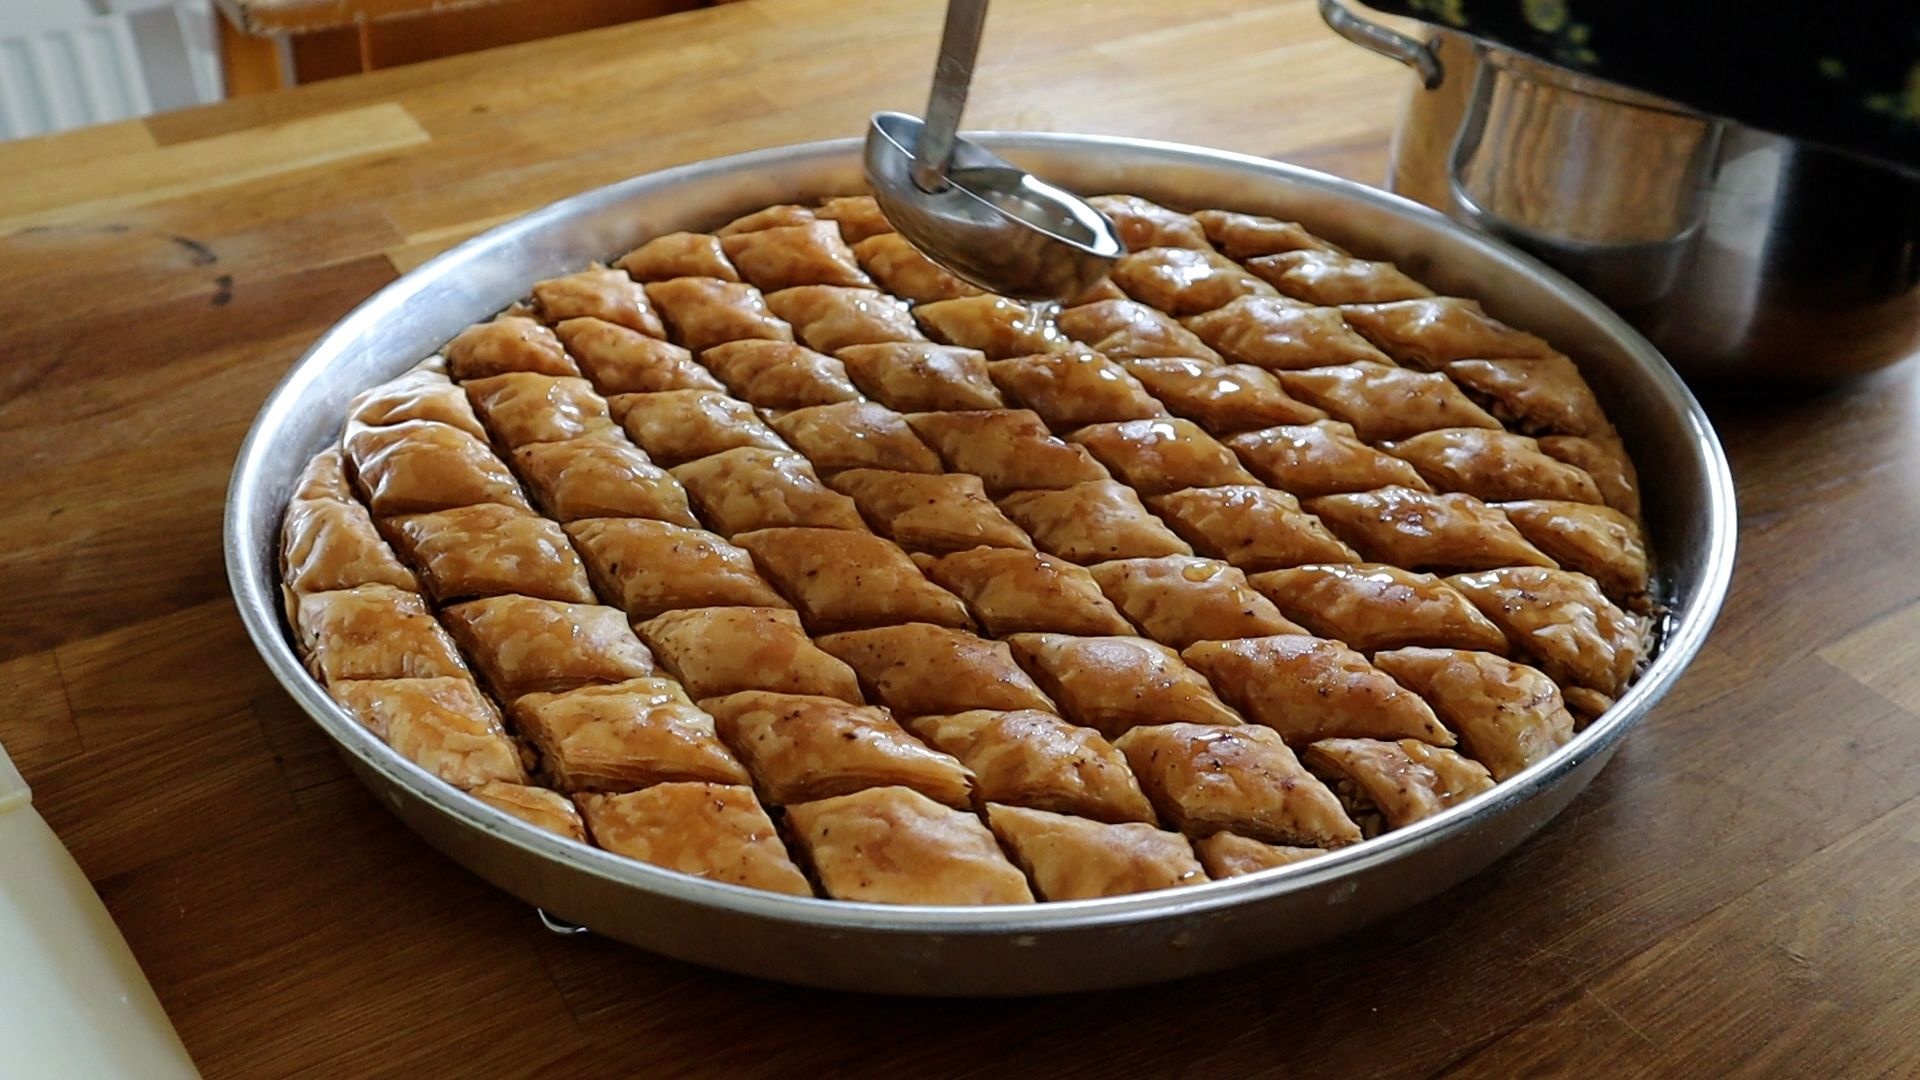 Baklava: Cooking involves layering dozens of sheets of phyllo pastry. 1920x1080 Full HD Background.